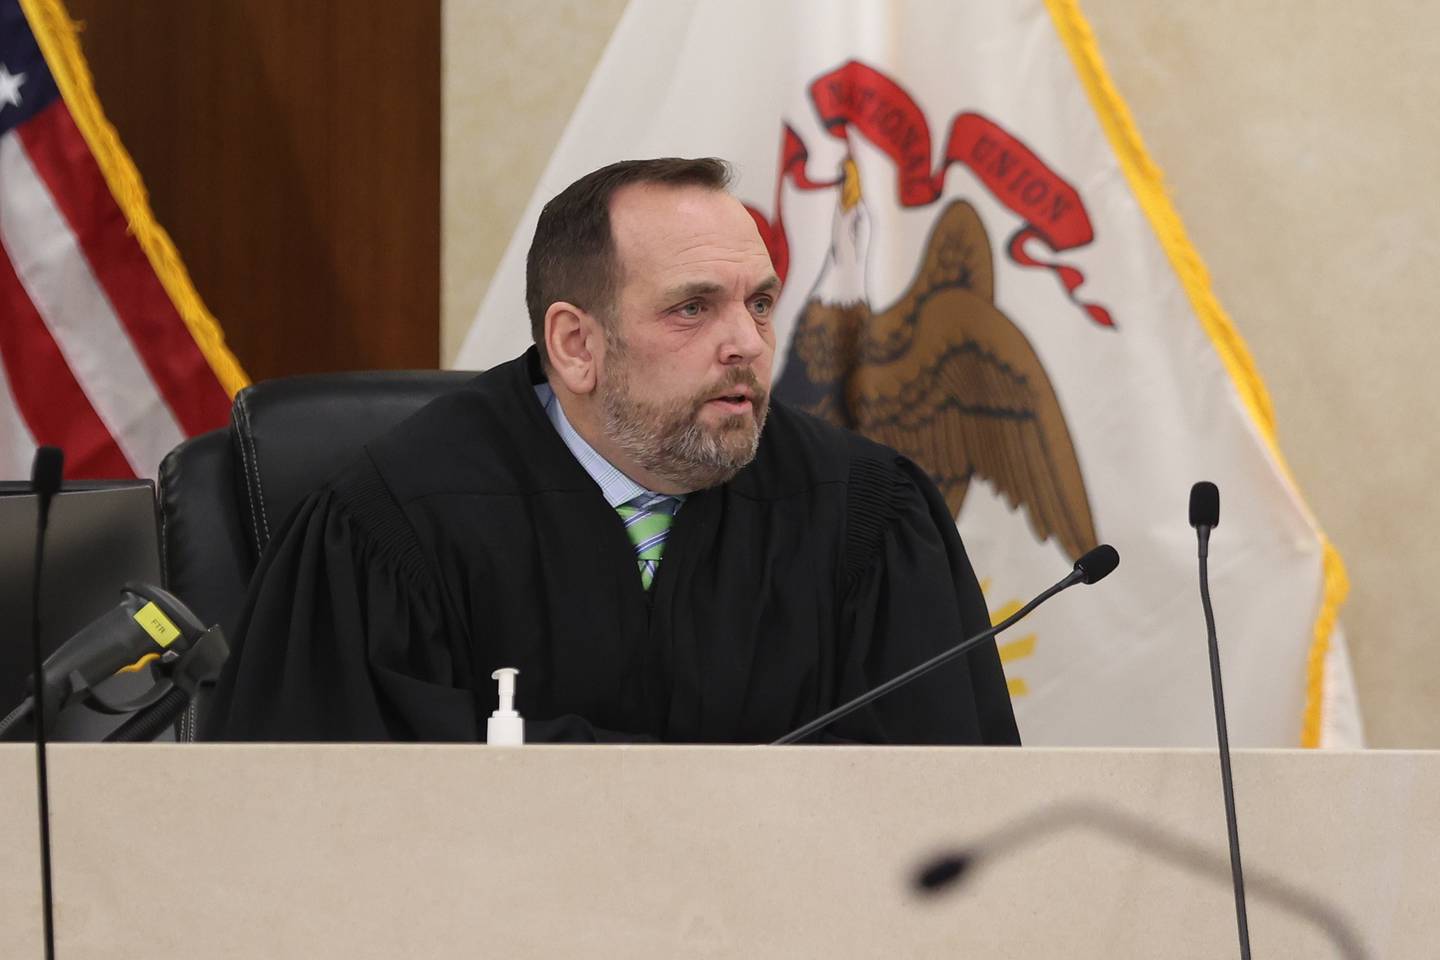 Judge Dan Rippy talks to the jury during closing arguments on Monday in the case against Sean Woulfe at the Will County Courthouse. Sean Woulfe, 29, is charge with reckless homicide of Lindsey Schmidt, 29, and her three sons, Owen, 6, Weston, 4, and Kaleb, 1. Monday, Mar. 28, 2022, in Joliet.